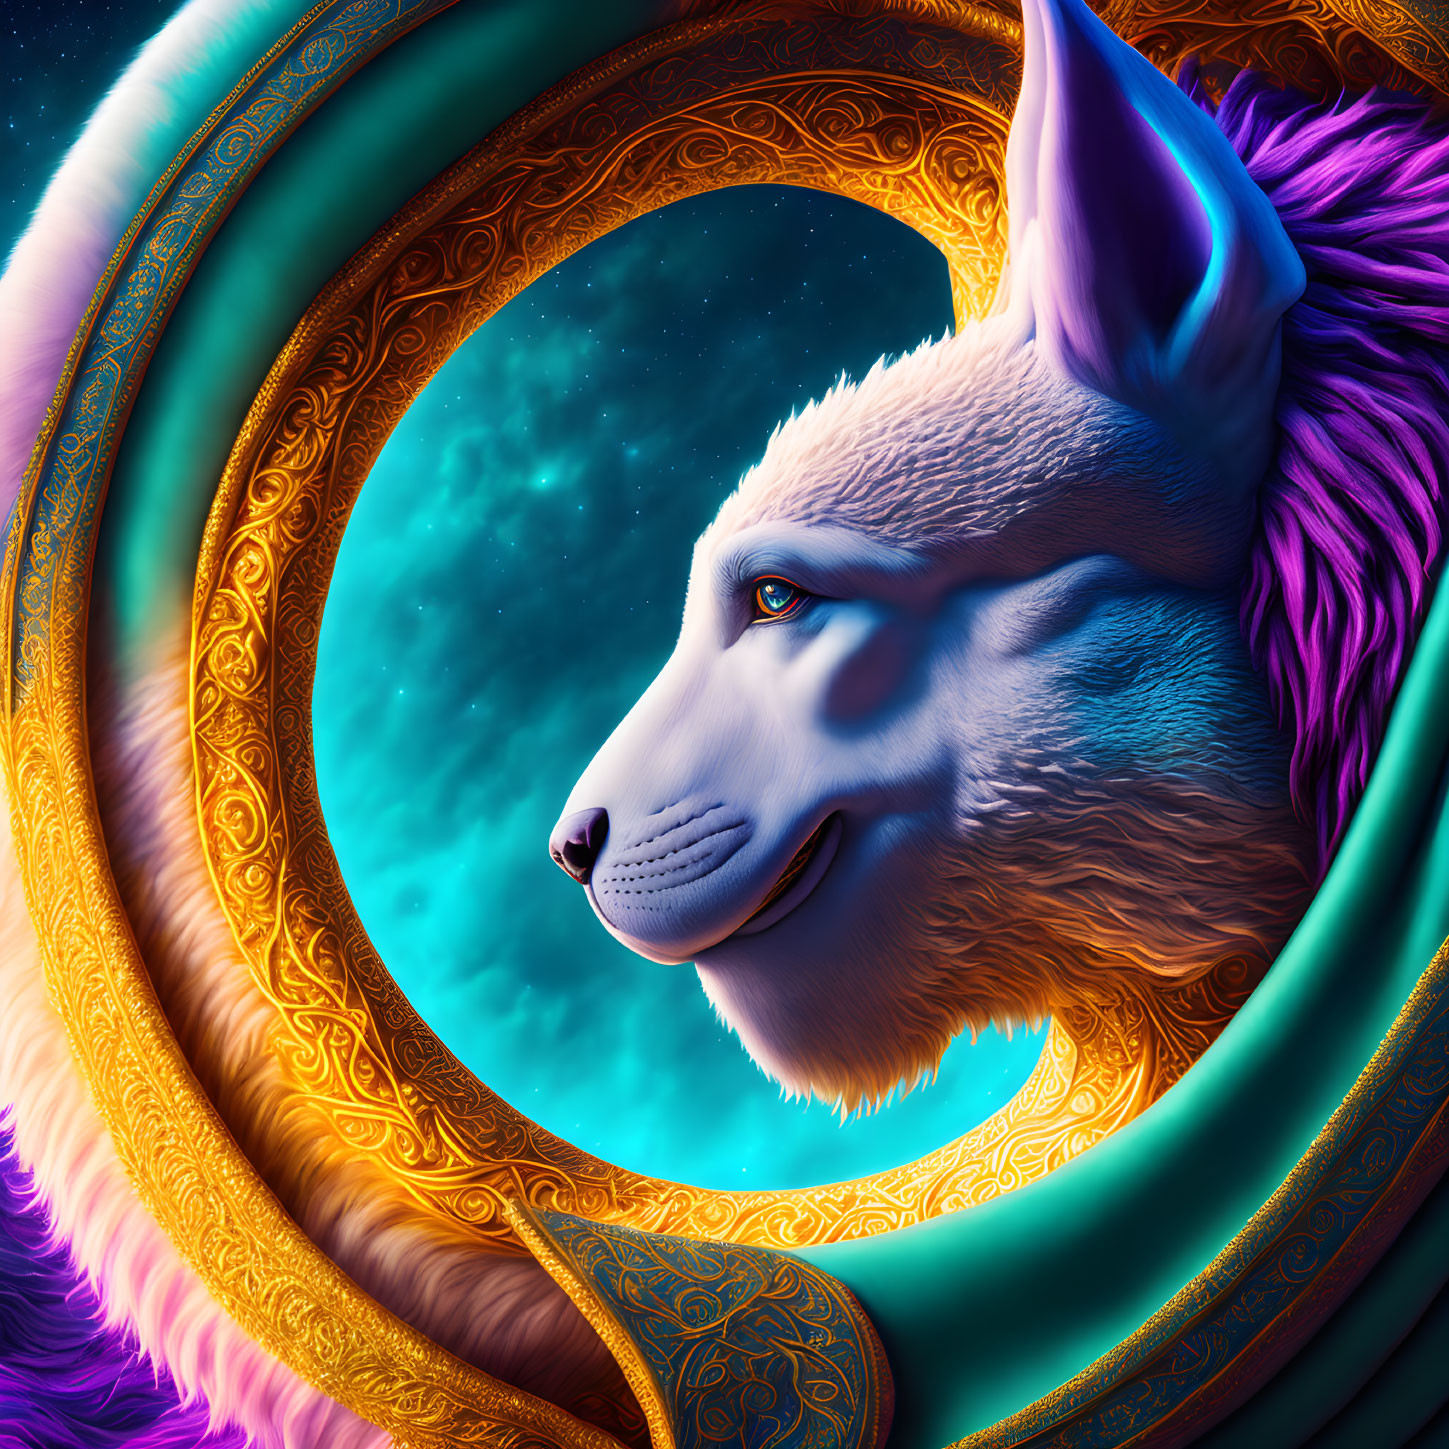 Colorful Wolf Profile Illustration with Cosmic Background in Ornate Golden Frame